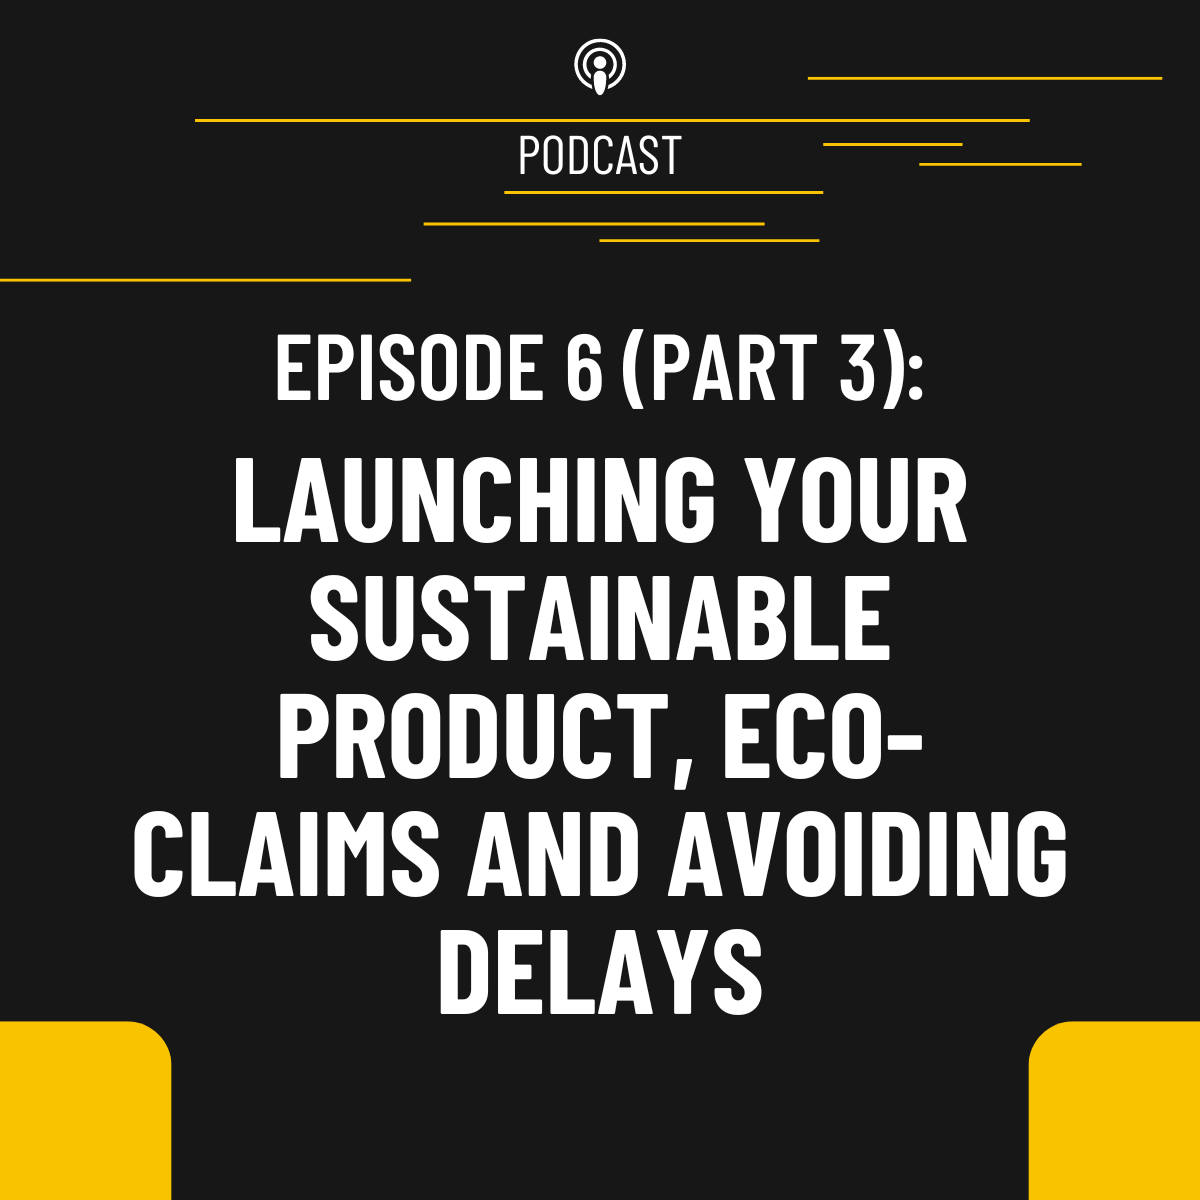 Episode 6, part 3: Launching your sustainable product, eco-claims and avoiding delays